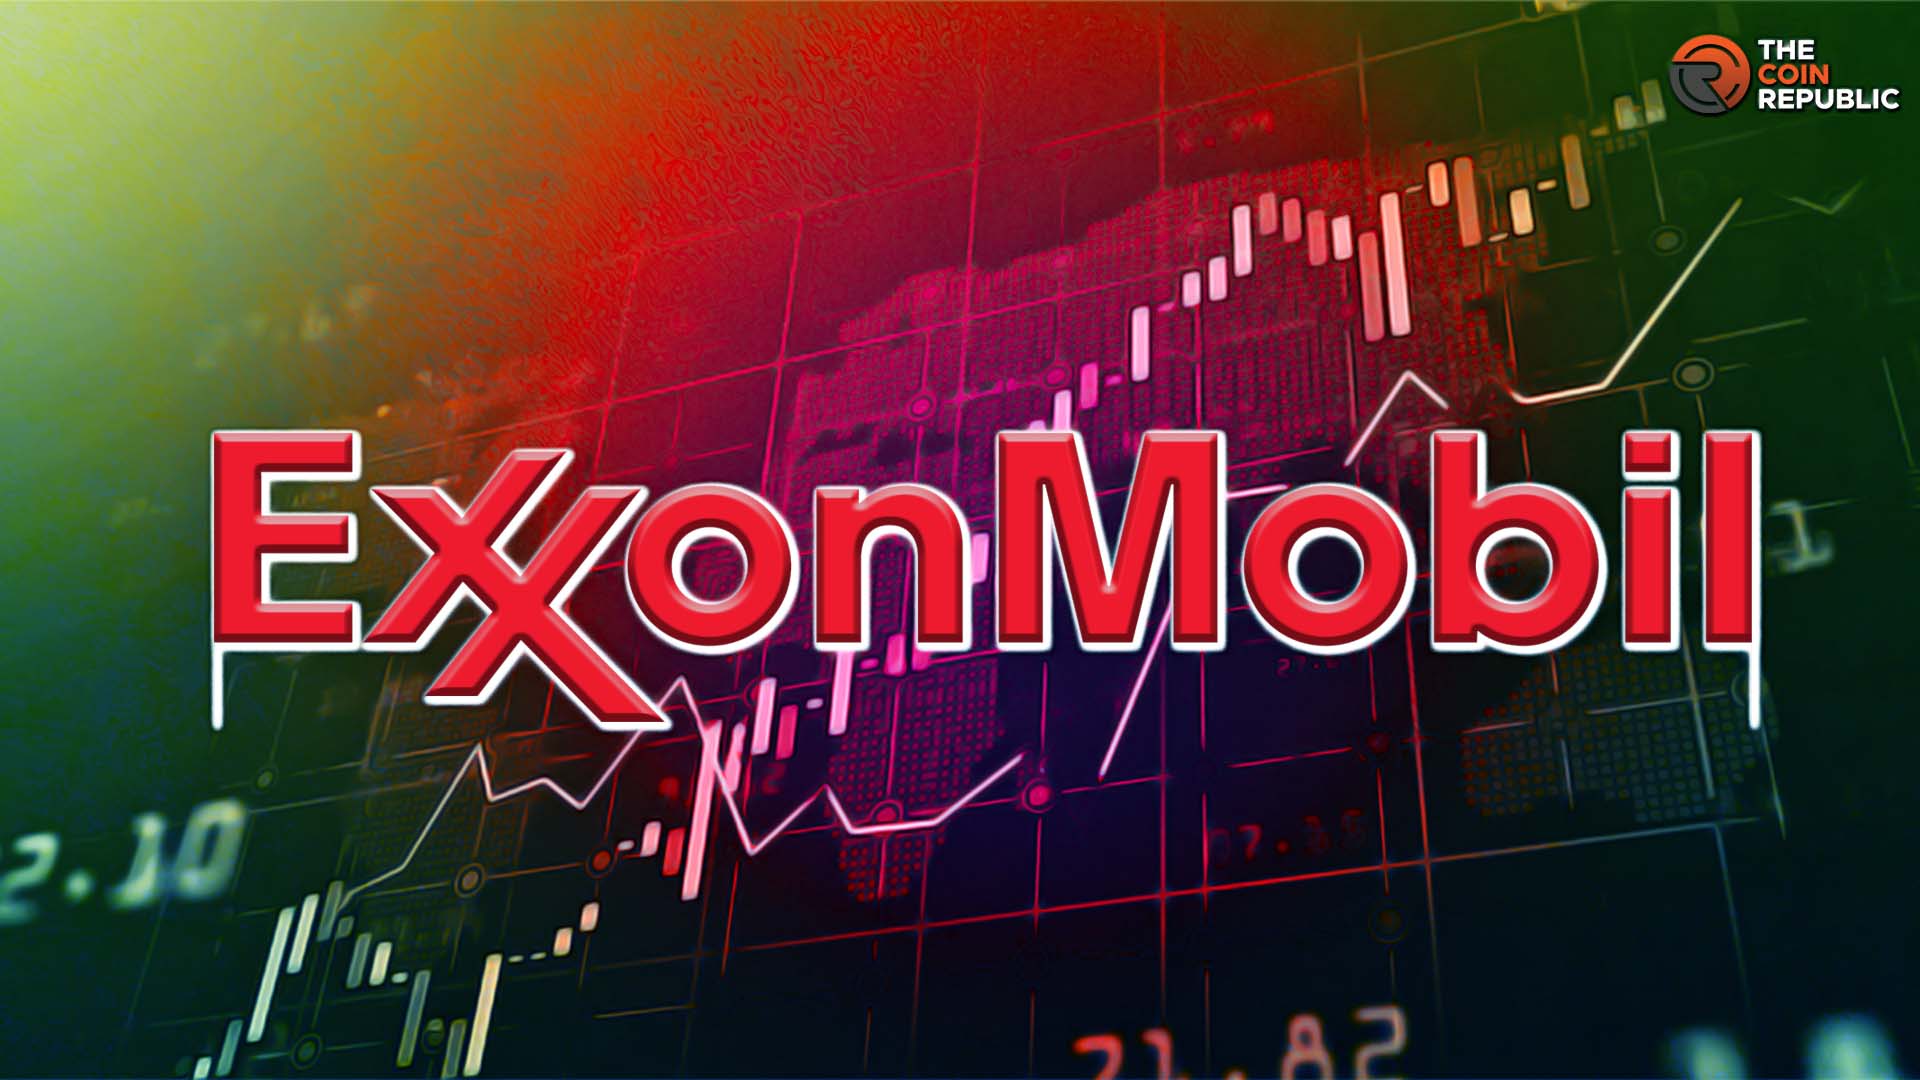 Exxon Mobil Corp. (XOM Stock): Price Consolidates Above $100